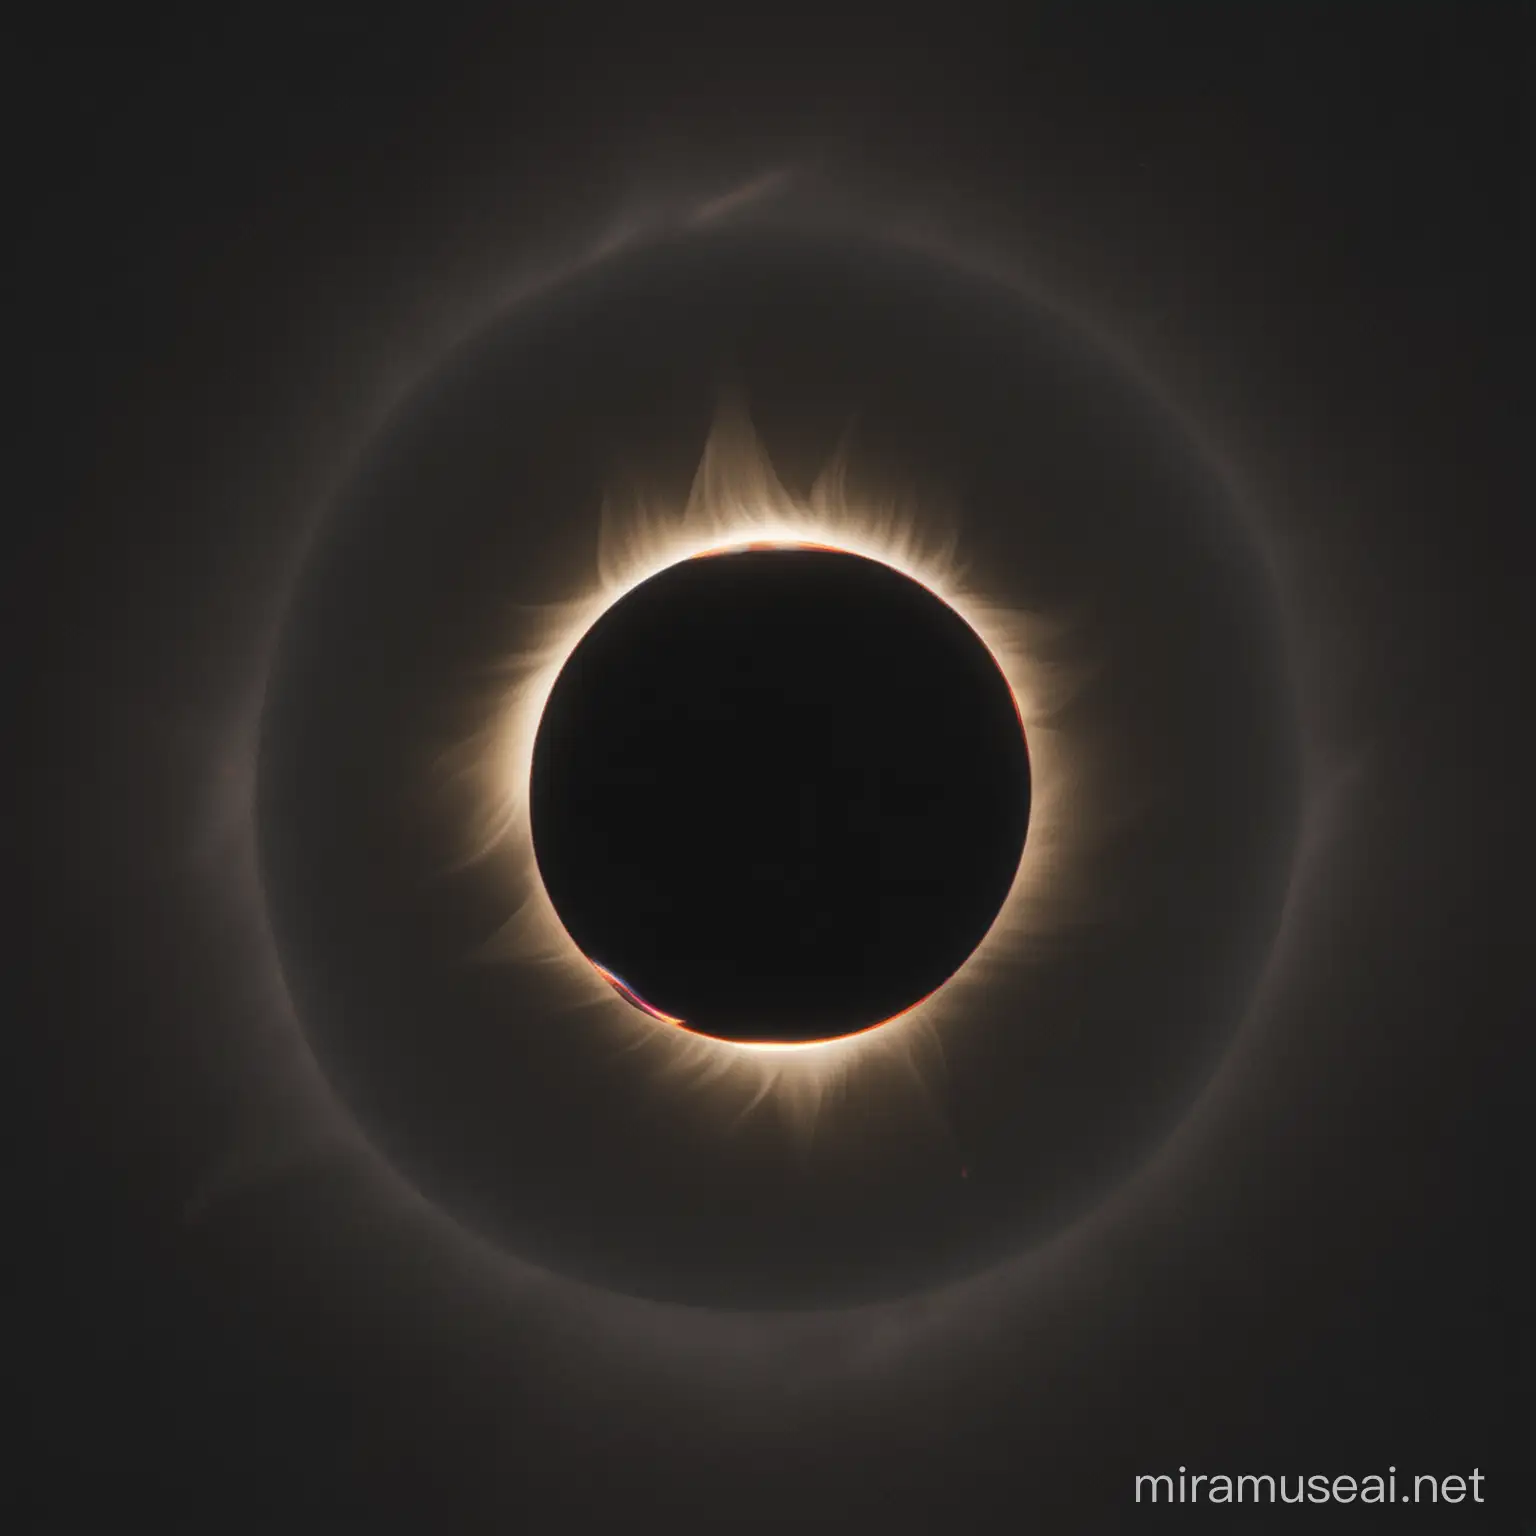 image of the complete eclipse